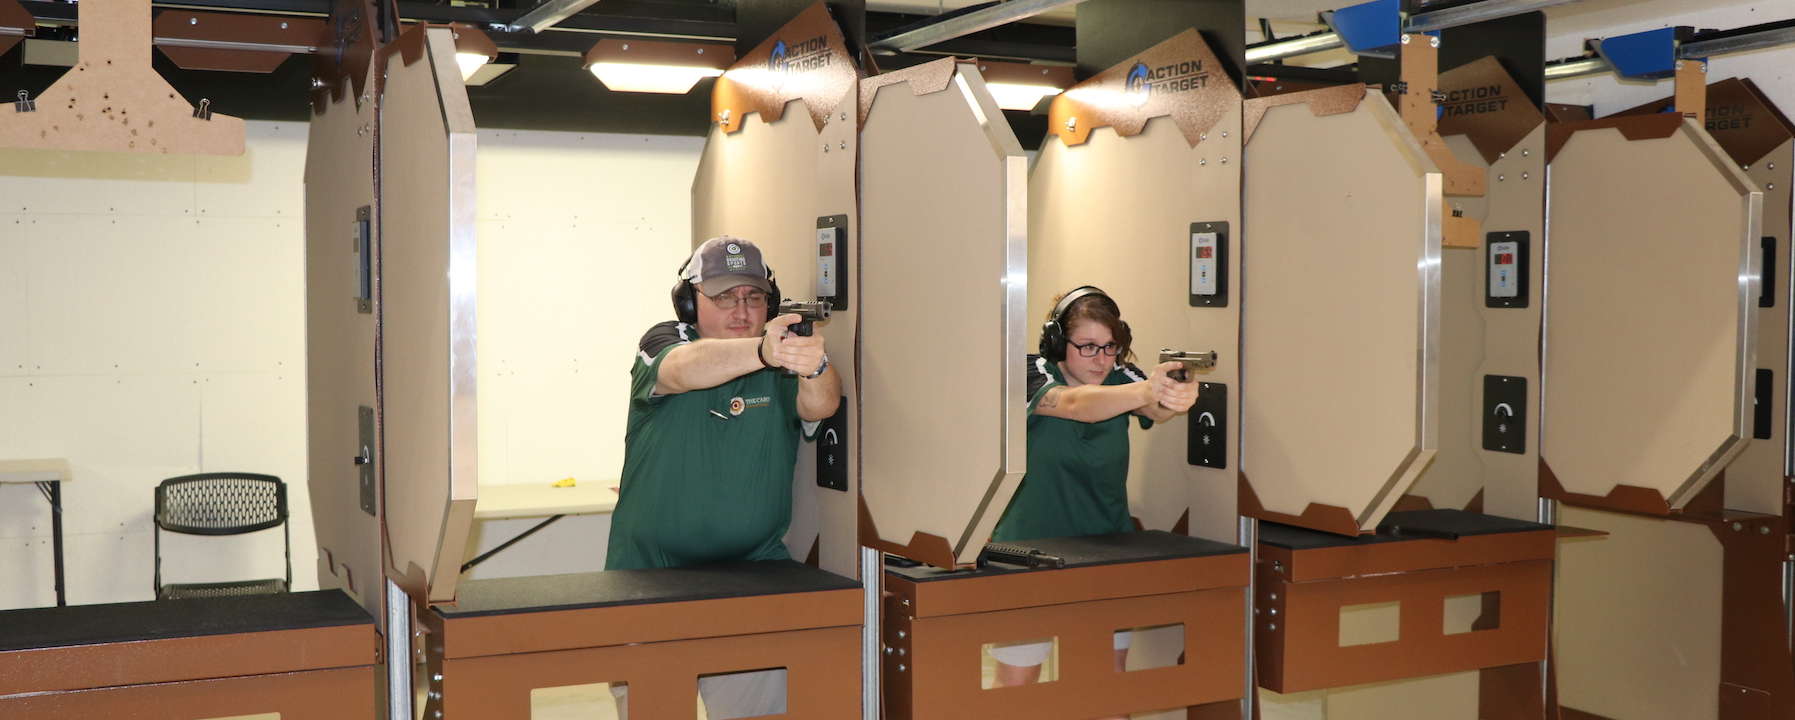 The Cabin's Indoor Shooting Range – The Cabin Armory & Training Center